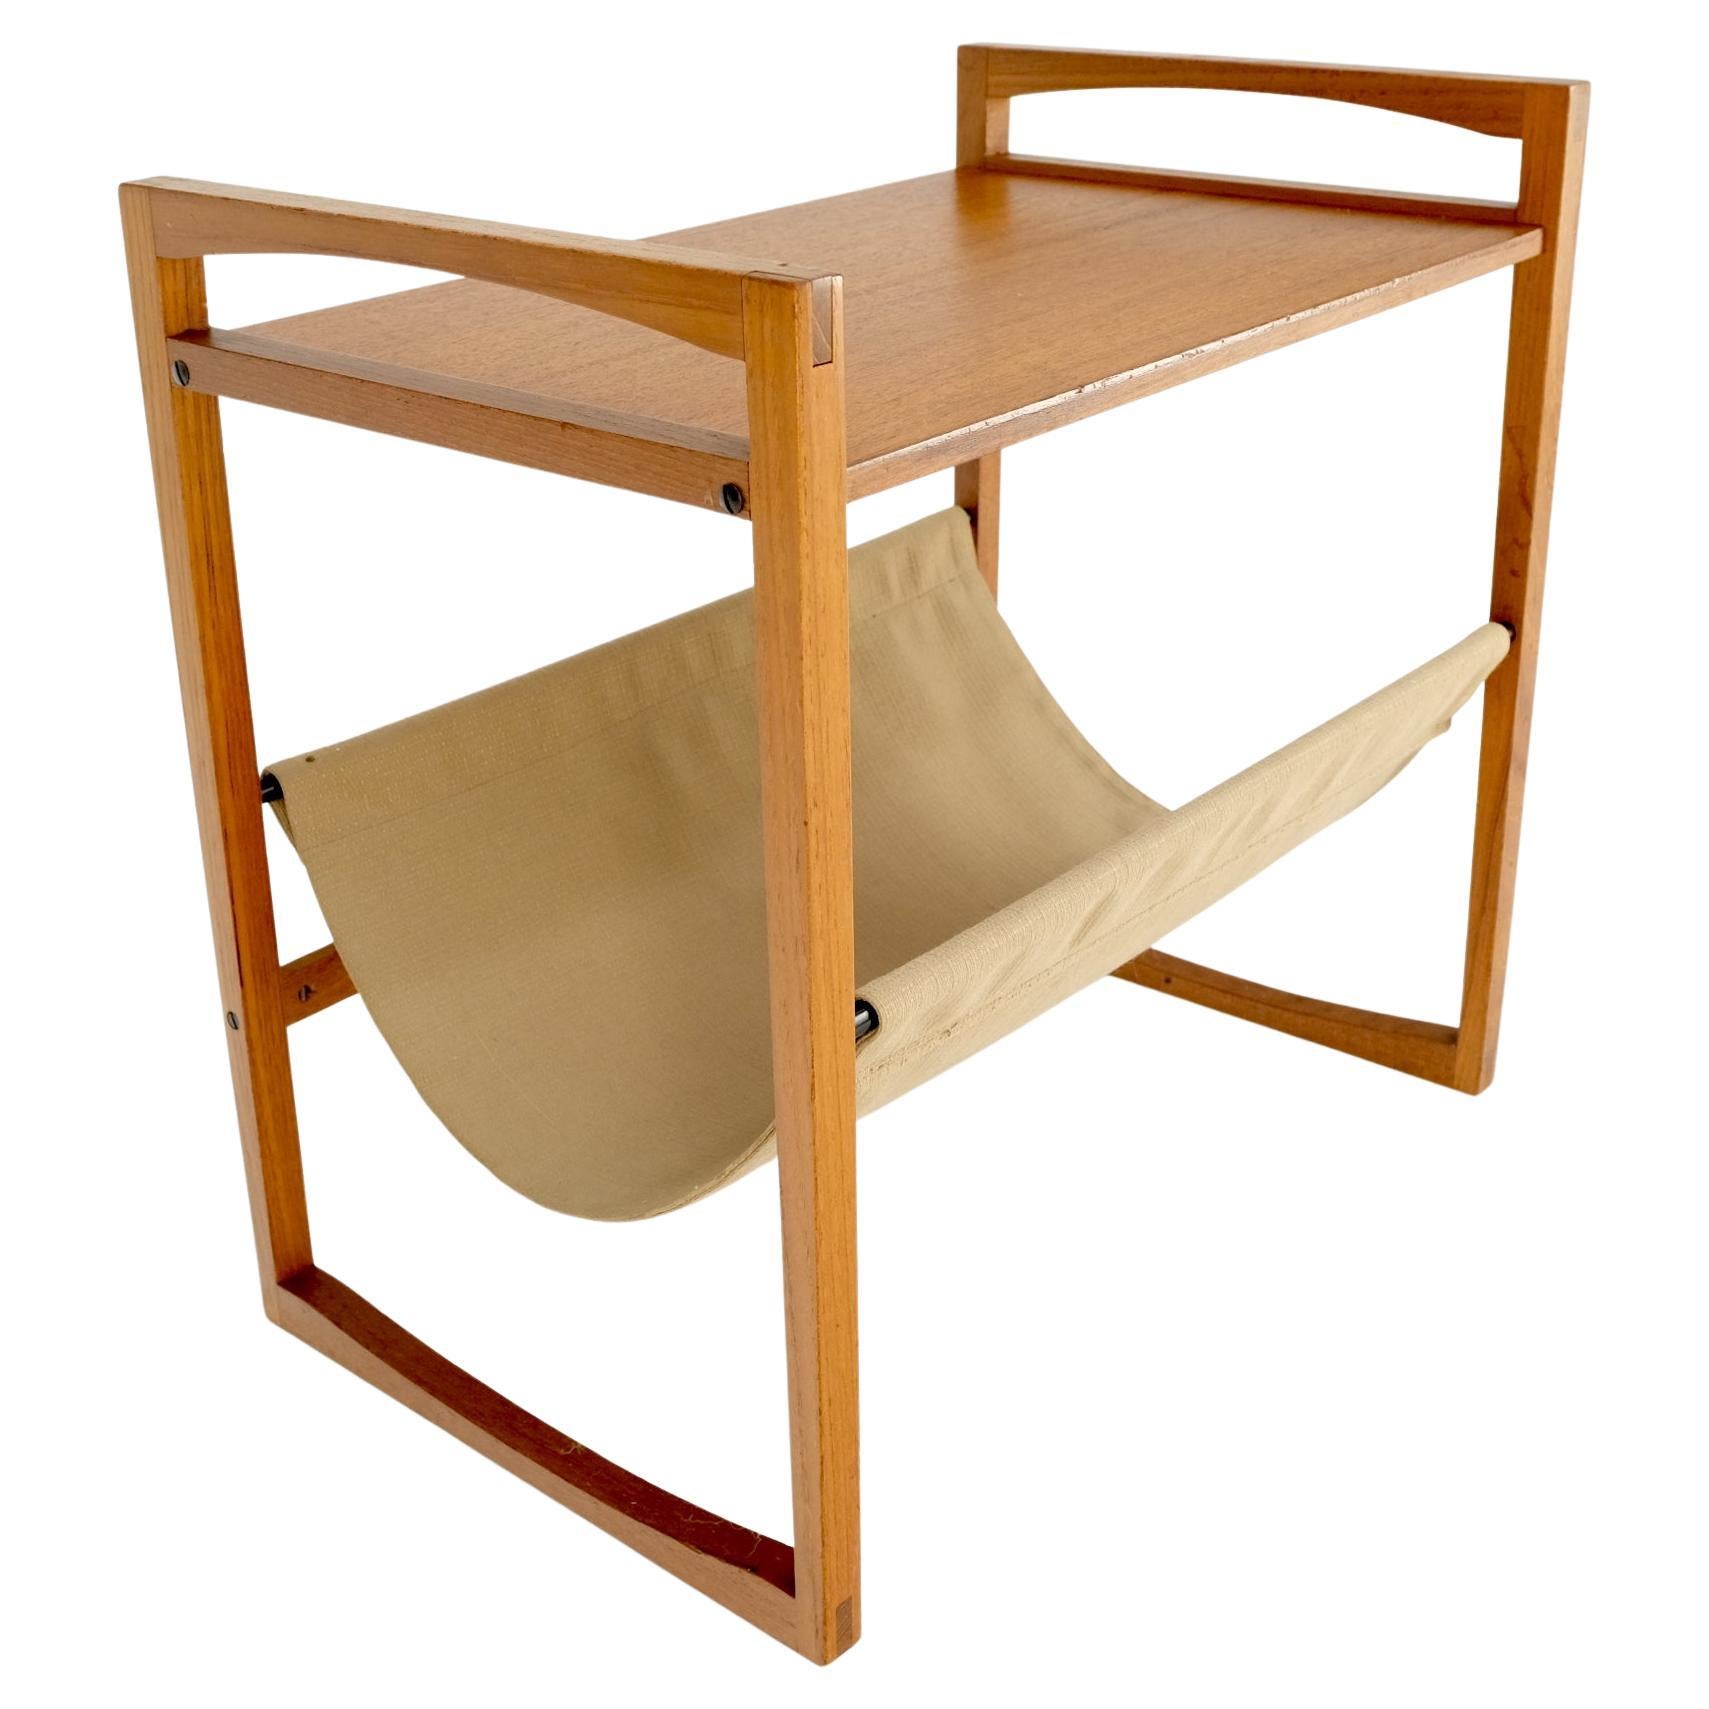 Teak And Suede Sling Shelf Mid-Century Modern End Table Stand Magazine Rack For Sale